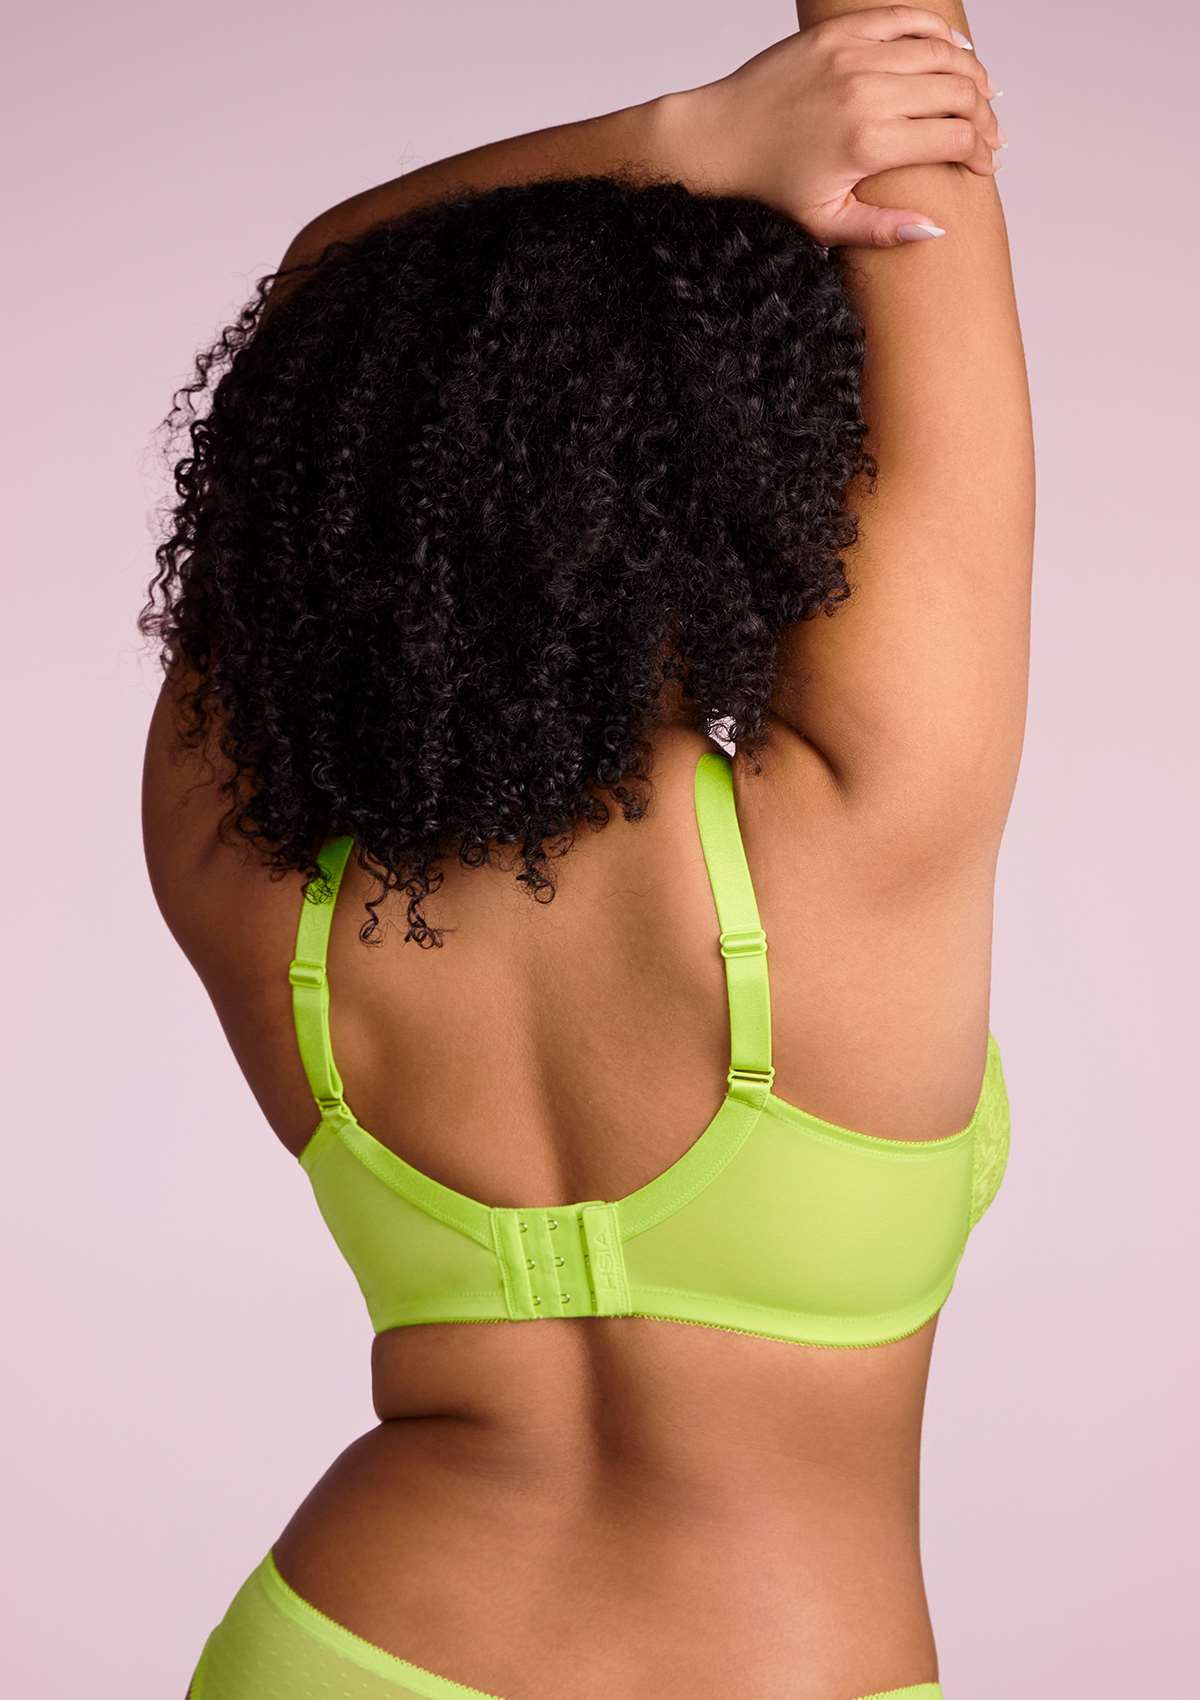 HSIA Enchante Full Cup Minimizing Bra: Supportive Unlined Lace Bra - Lime Green / 40 / I